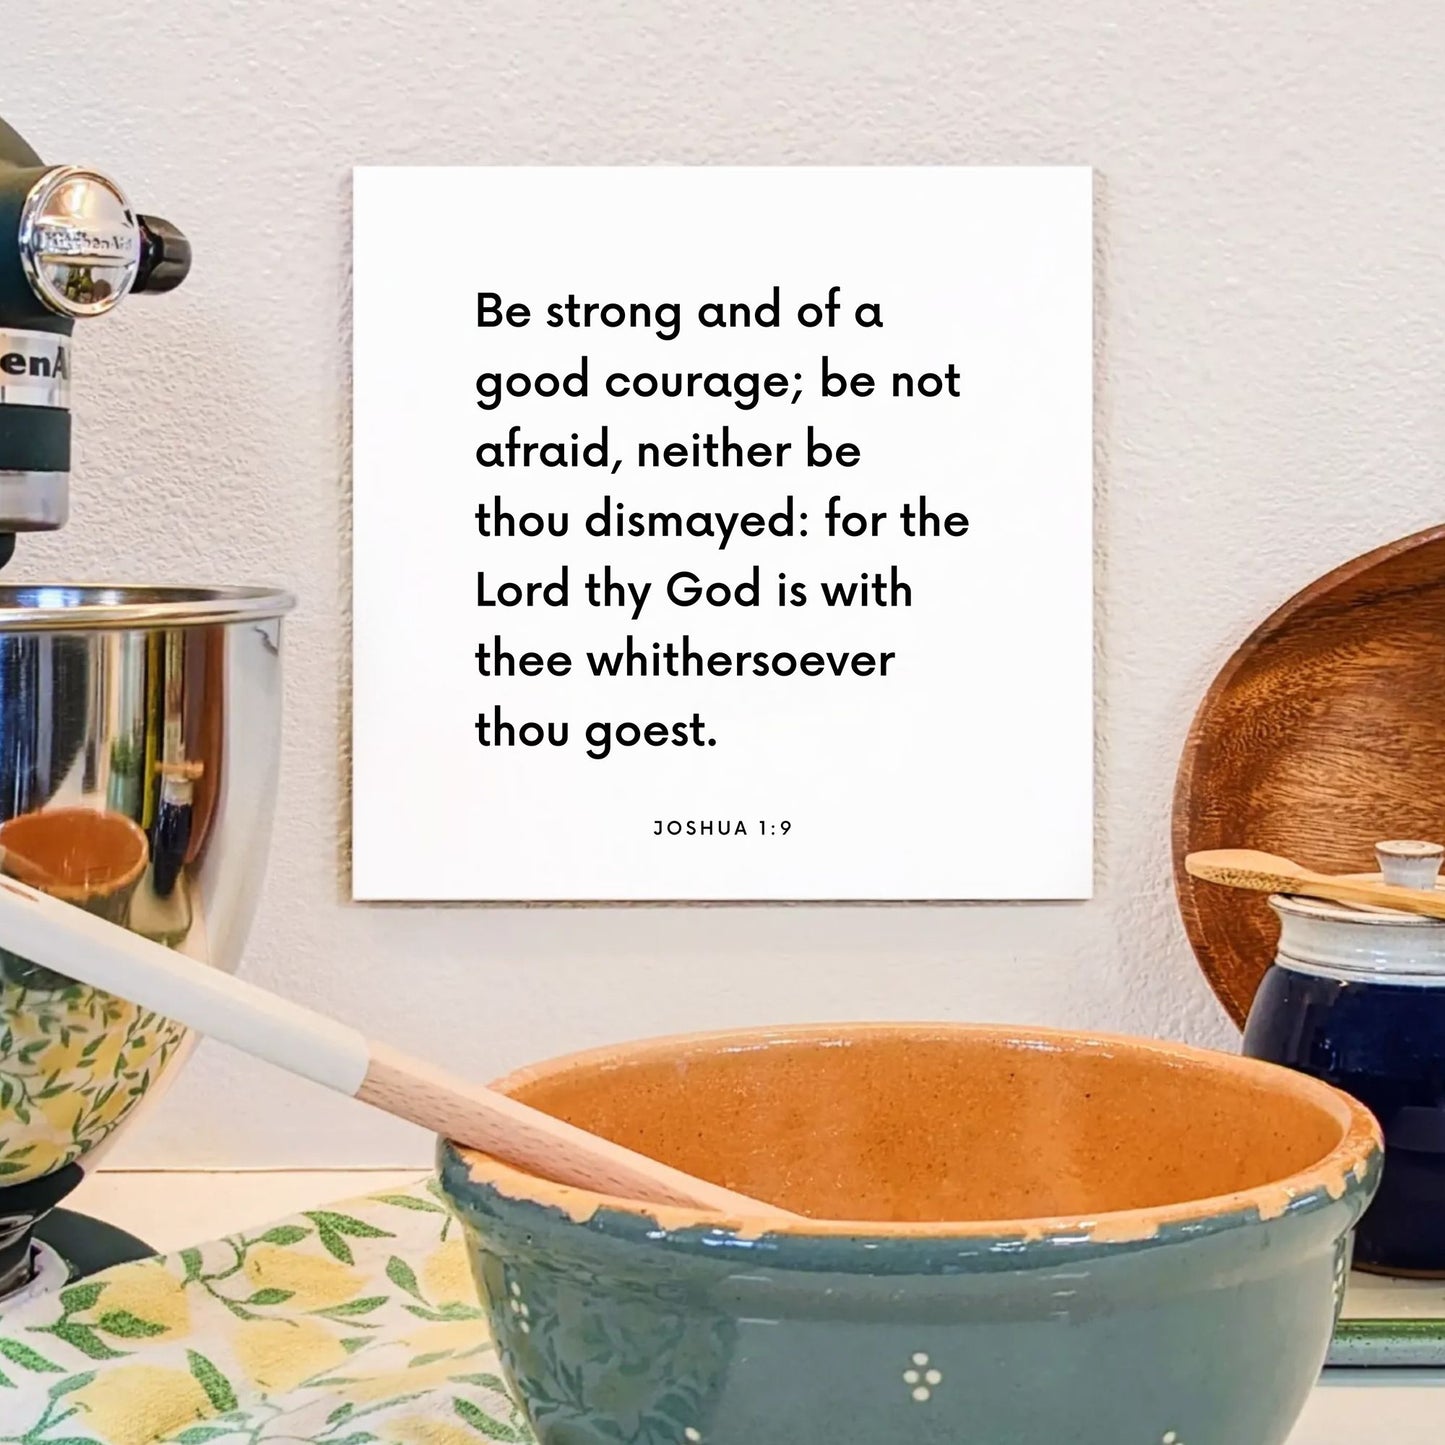 Kitchen mouting of the scripture tile for Joshua 1:9 - "Be strong and of a good courage"